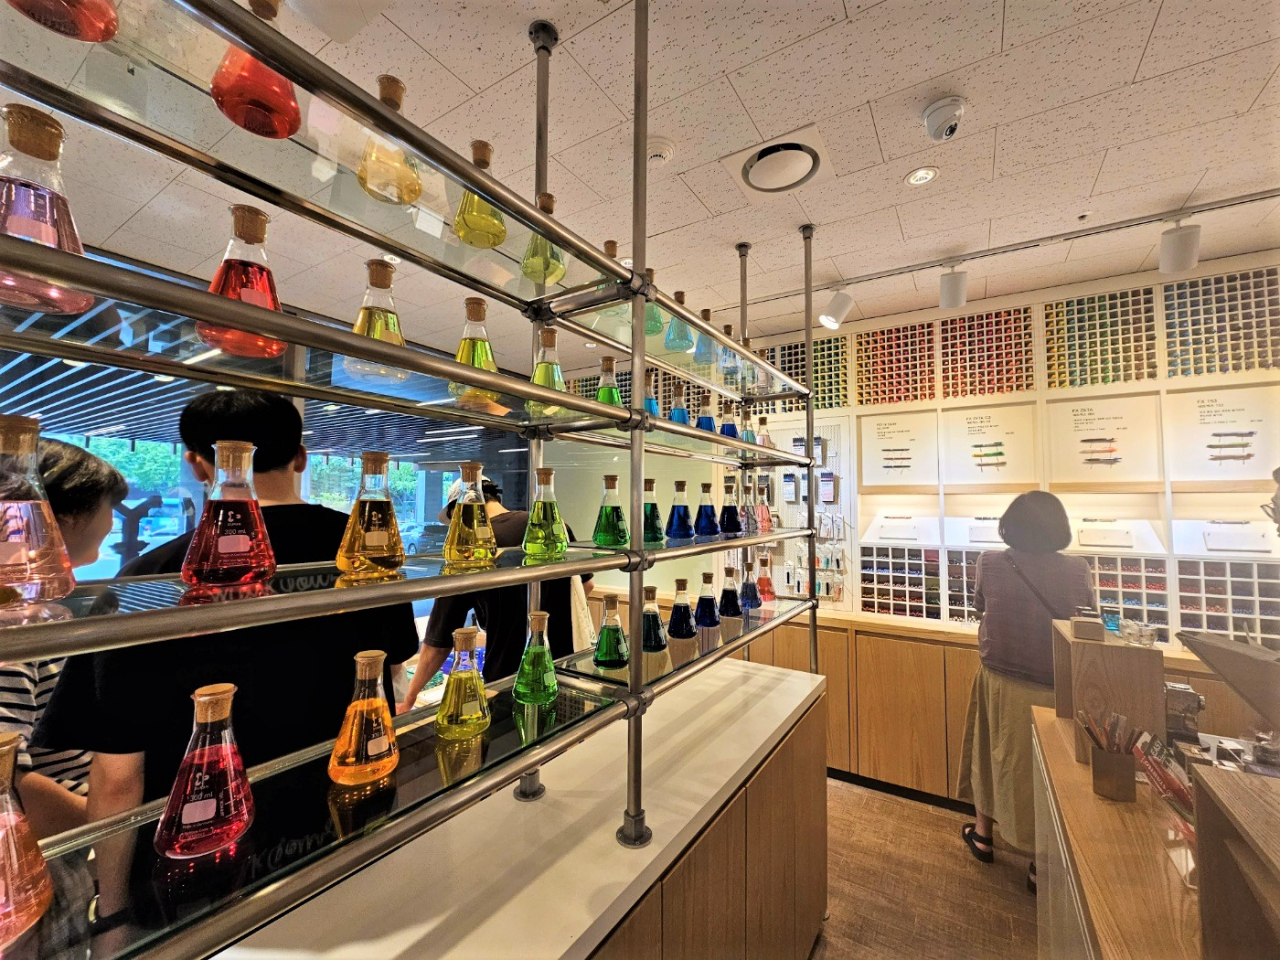 Visitors look through different kinds of stationery items at the Monami concept store in Insa-dong, northern Seoul. (Kim Hae-yeon/ The Korea Herald)